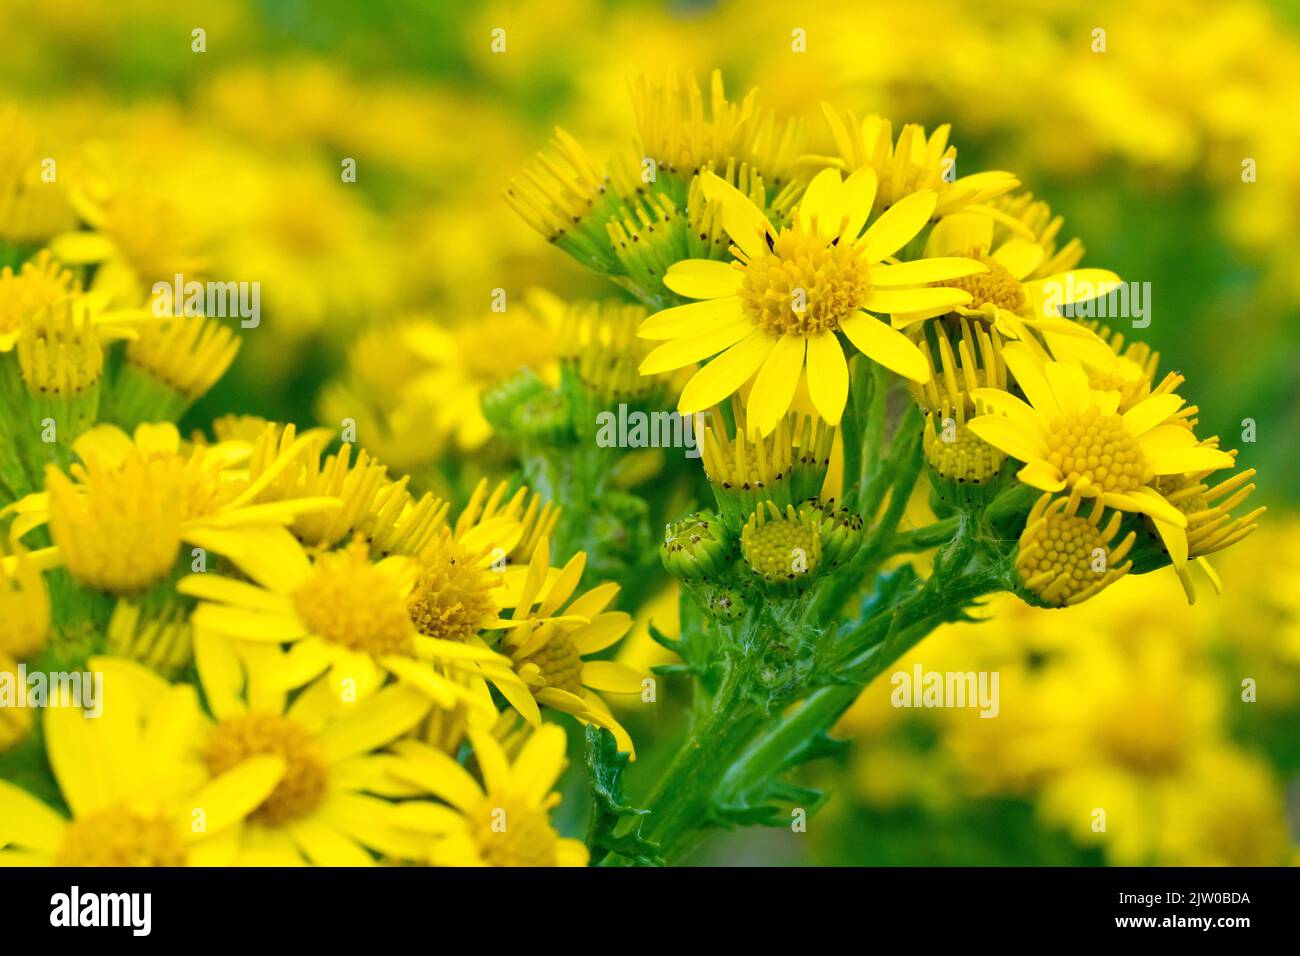 Common Ragwort (senecio jacobaea), close up showing a single crown of yellow flowers as they begin to bloom from a multitude of buds. Stock Photo